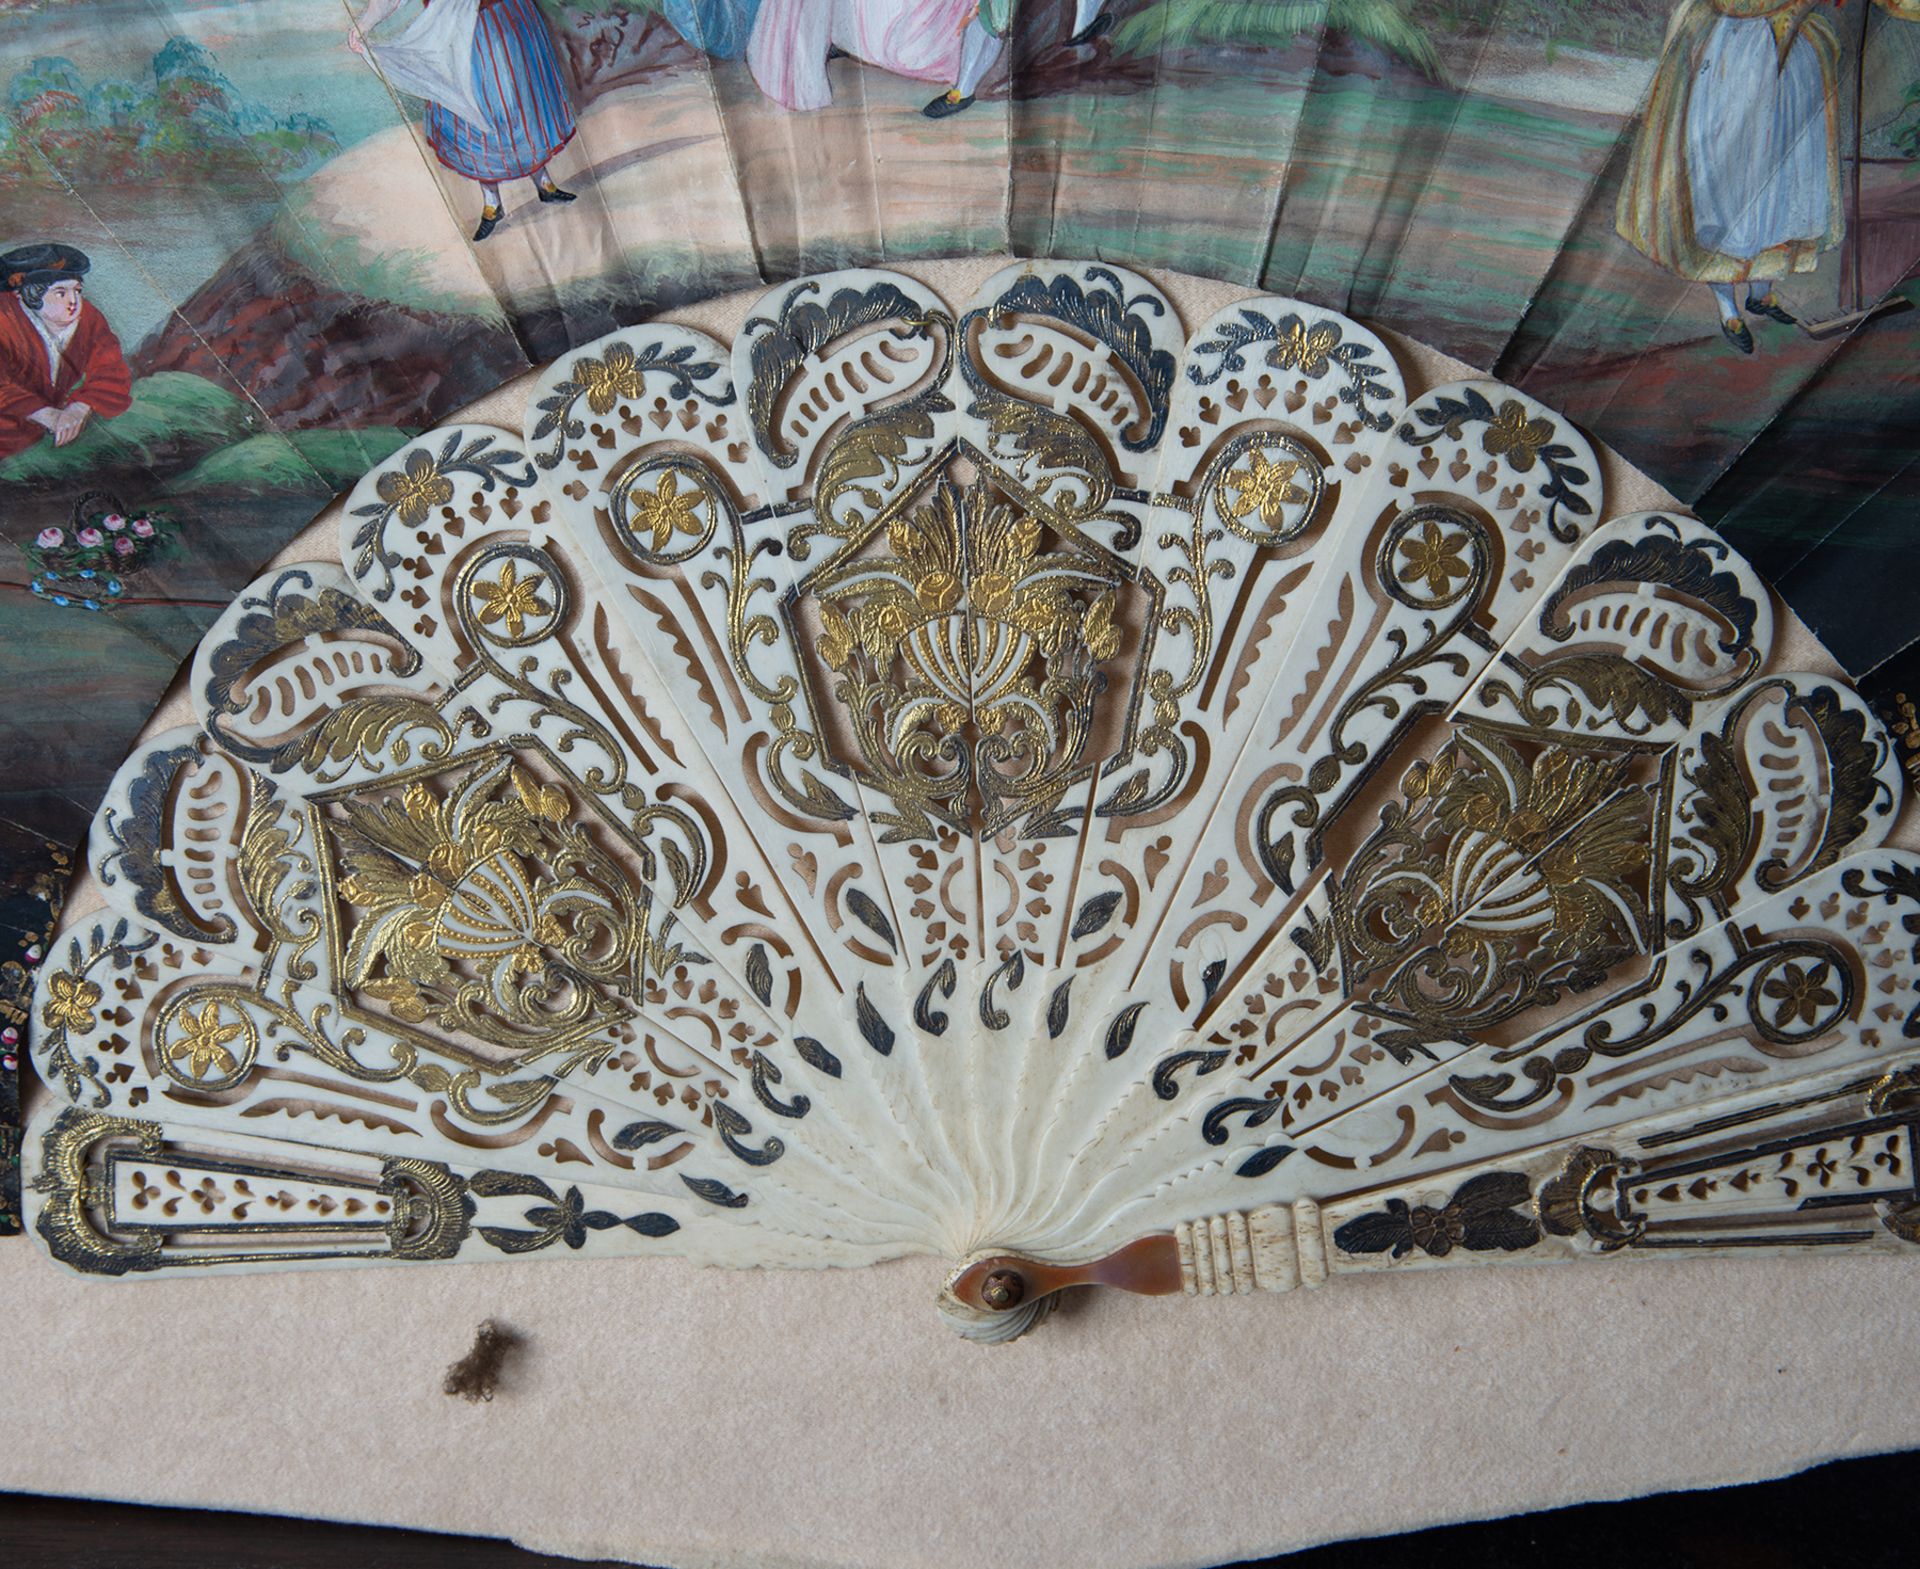 Fan with a hand-painted gallant scene, 19th century - Bild 3 aus 3